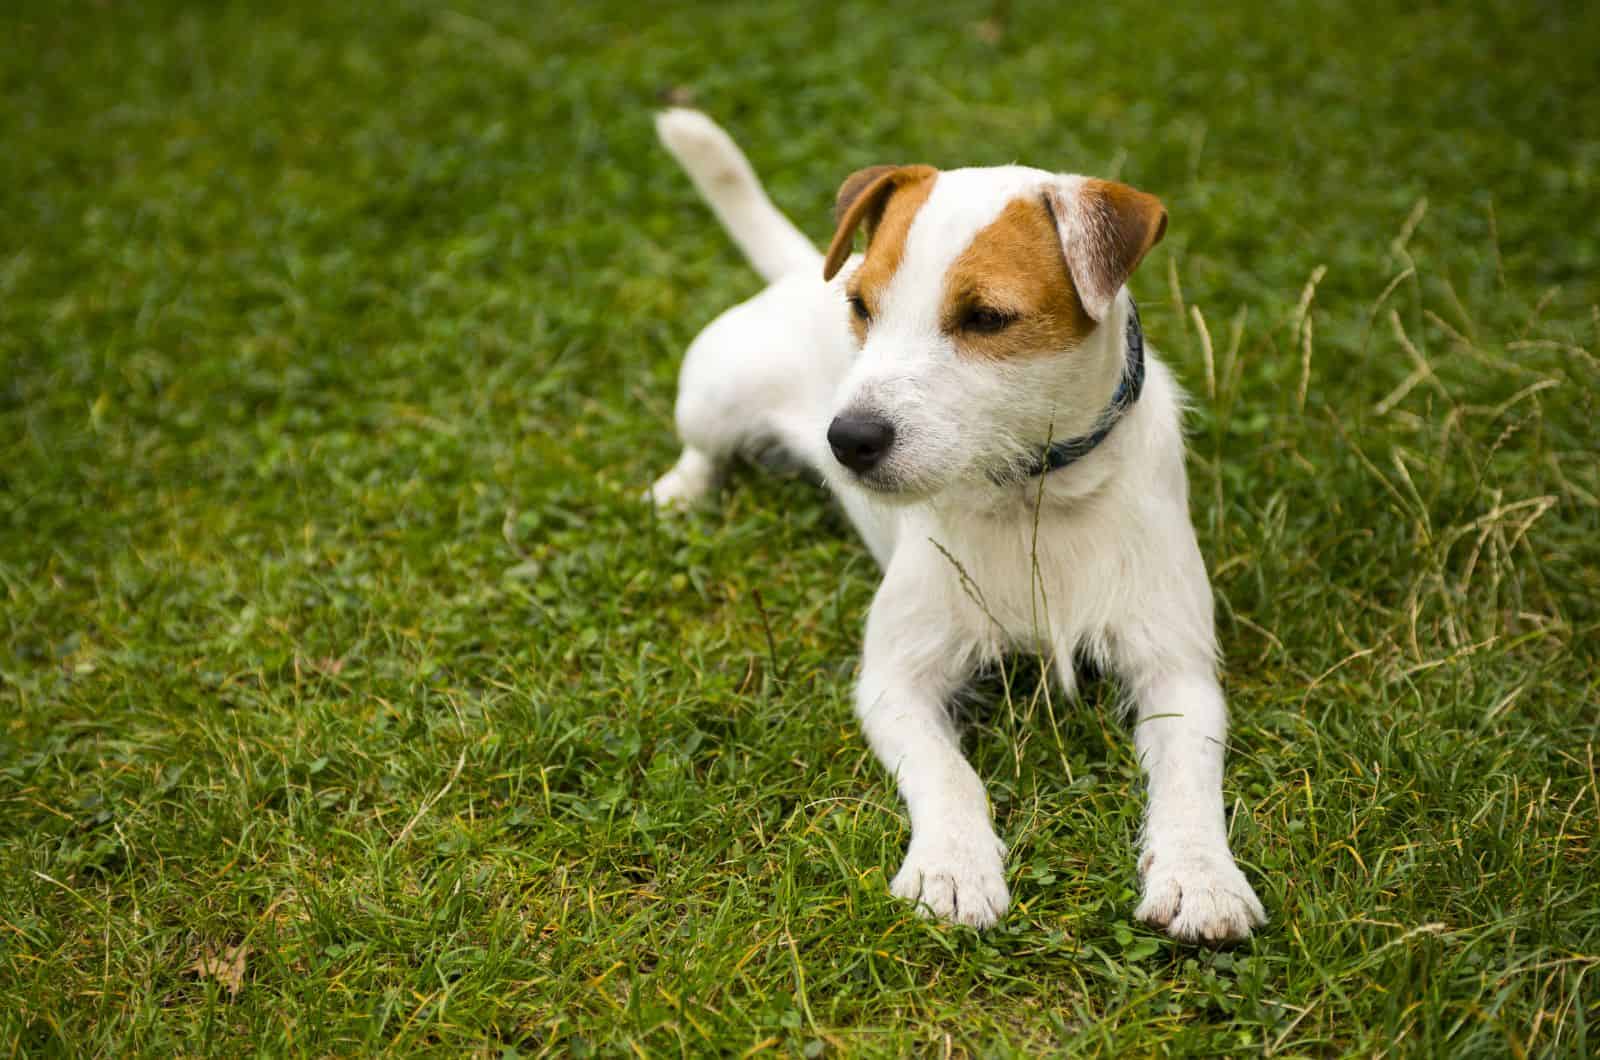 Parson Russell Terrier sitting on grass outside